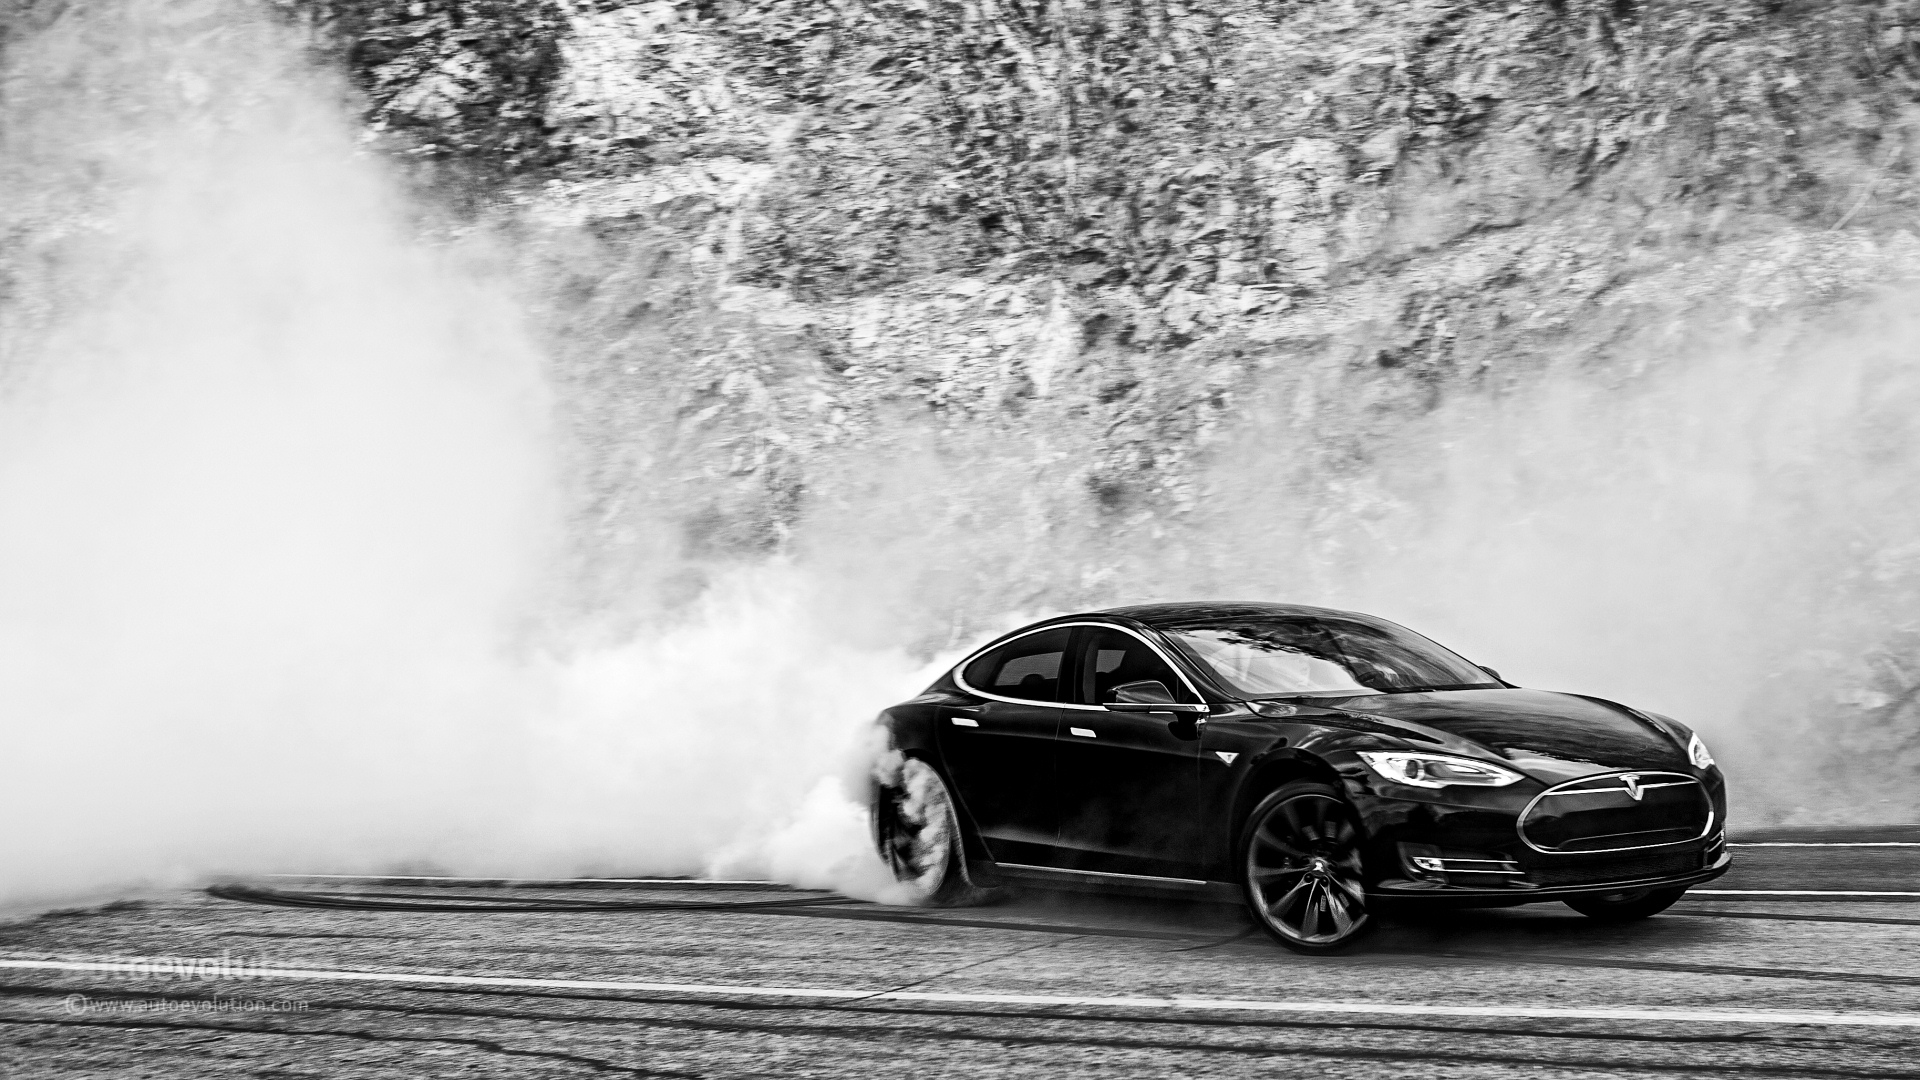 Tesla's Model S may be labeled as a performance sedan, especially in the P85 guise we drove, but, for some, it could sound silly to try to bake donuts in an ...